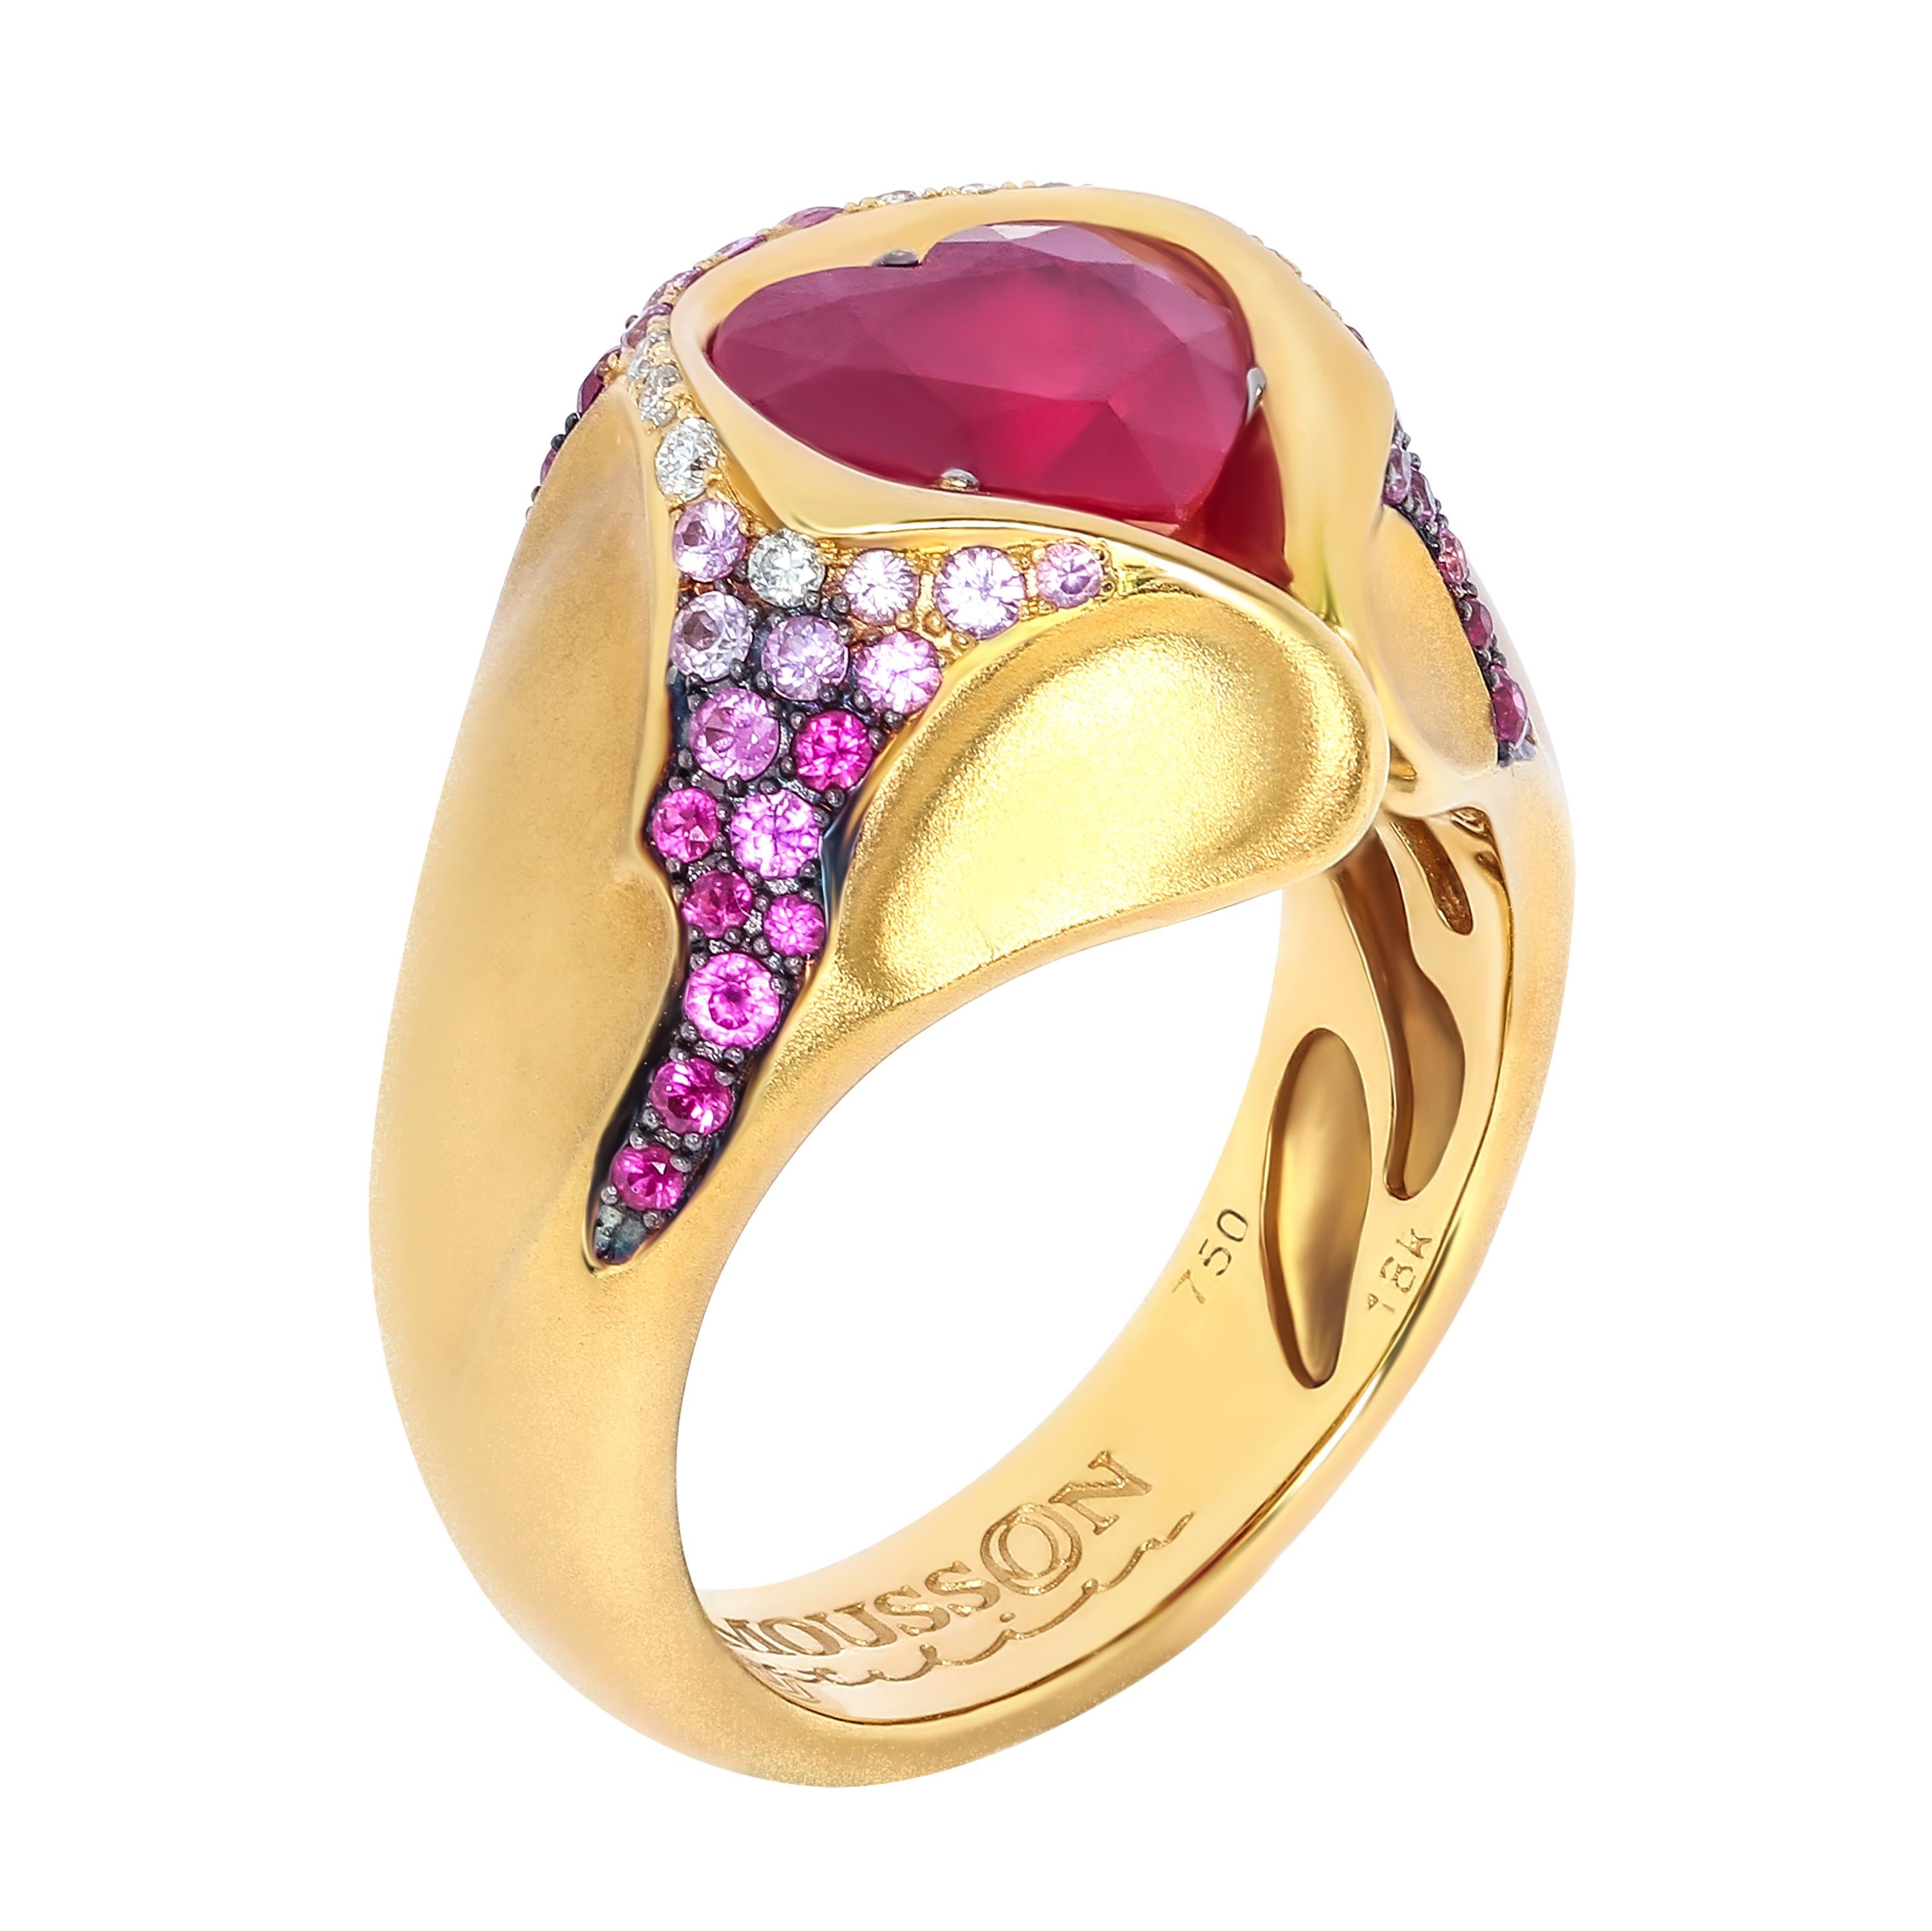 Ruby 2.20 Carat Diamond Pink Sapphire Rubies 18 Karat Yellow Gold HeartBeat Ring
Ring from the HeartBeat Collection. Сomposition resembles an exploded volcano, from the mouth of which lava flows from all sides. Center of the Yellow 18K Gold